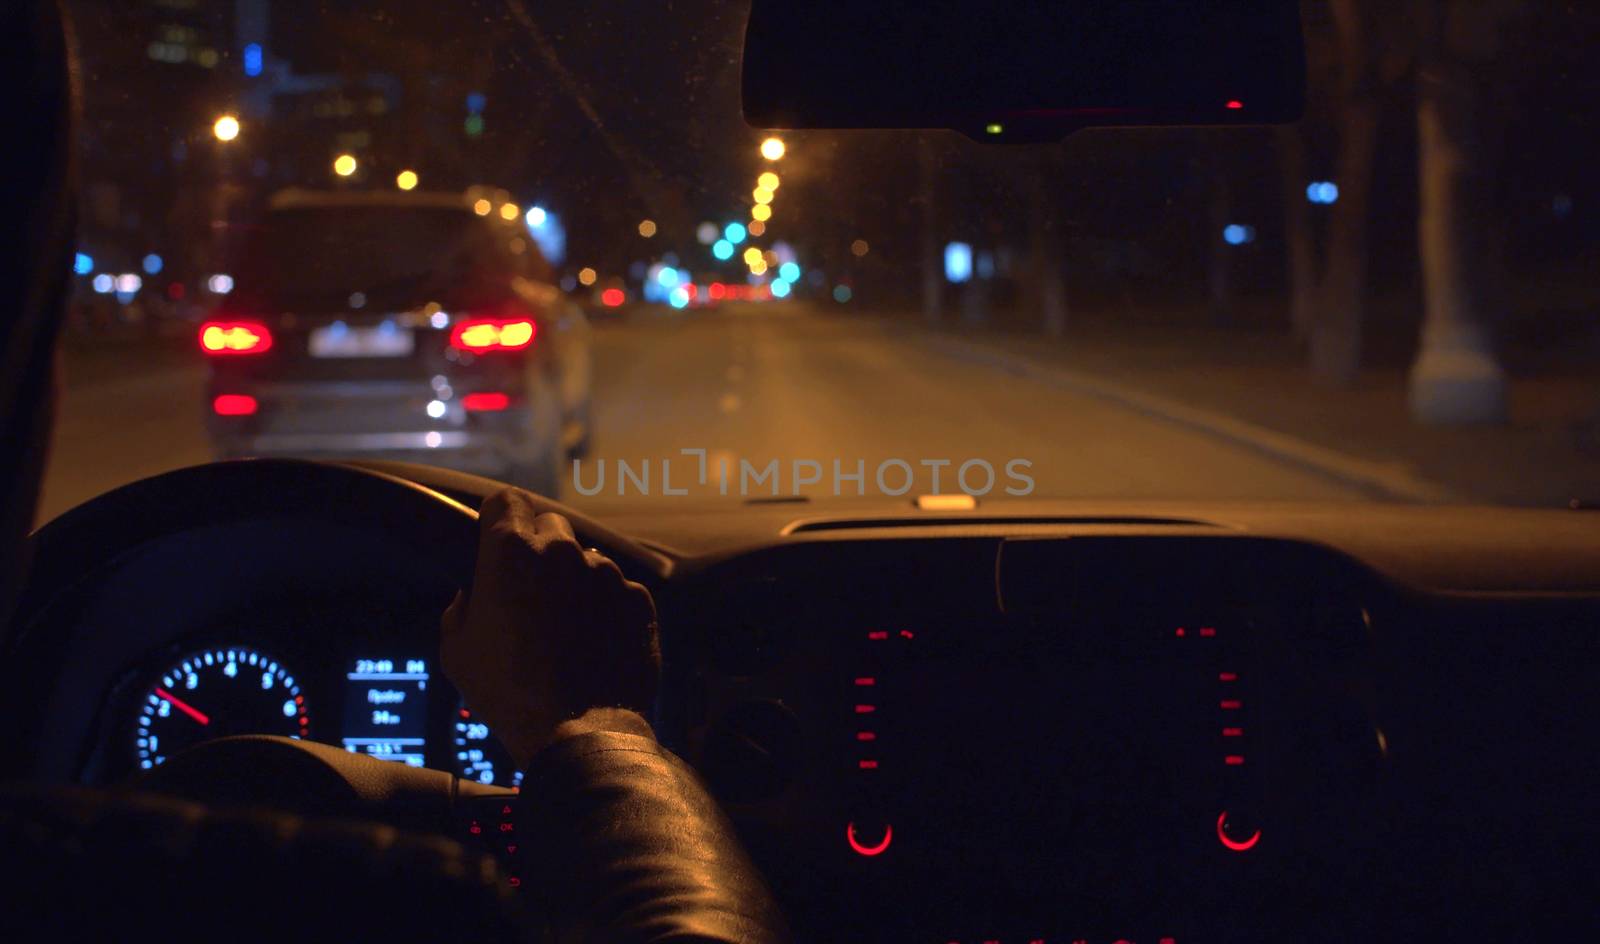 Close up man's hands on the steering wheel of a car. Console and instrument panel lights up inside the dark interior of a car while driving at night. POV. Blurred lights on the city street